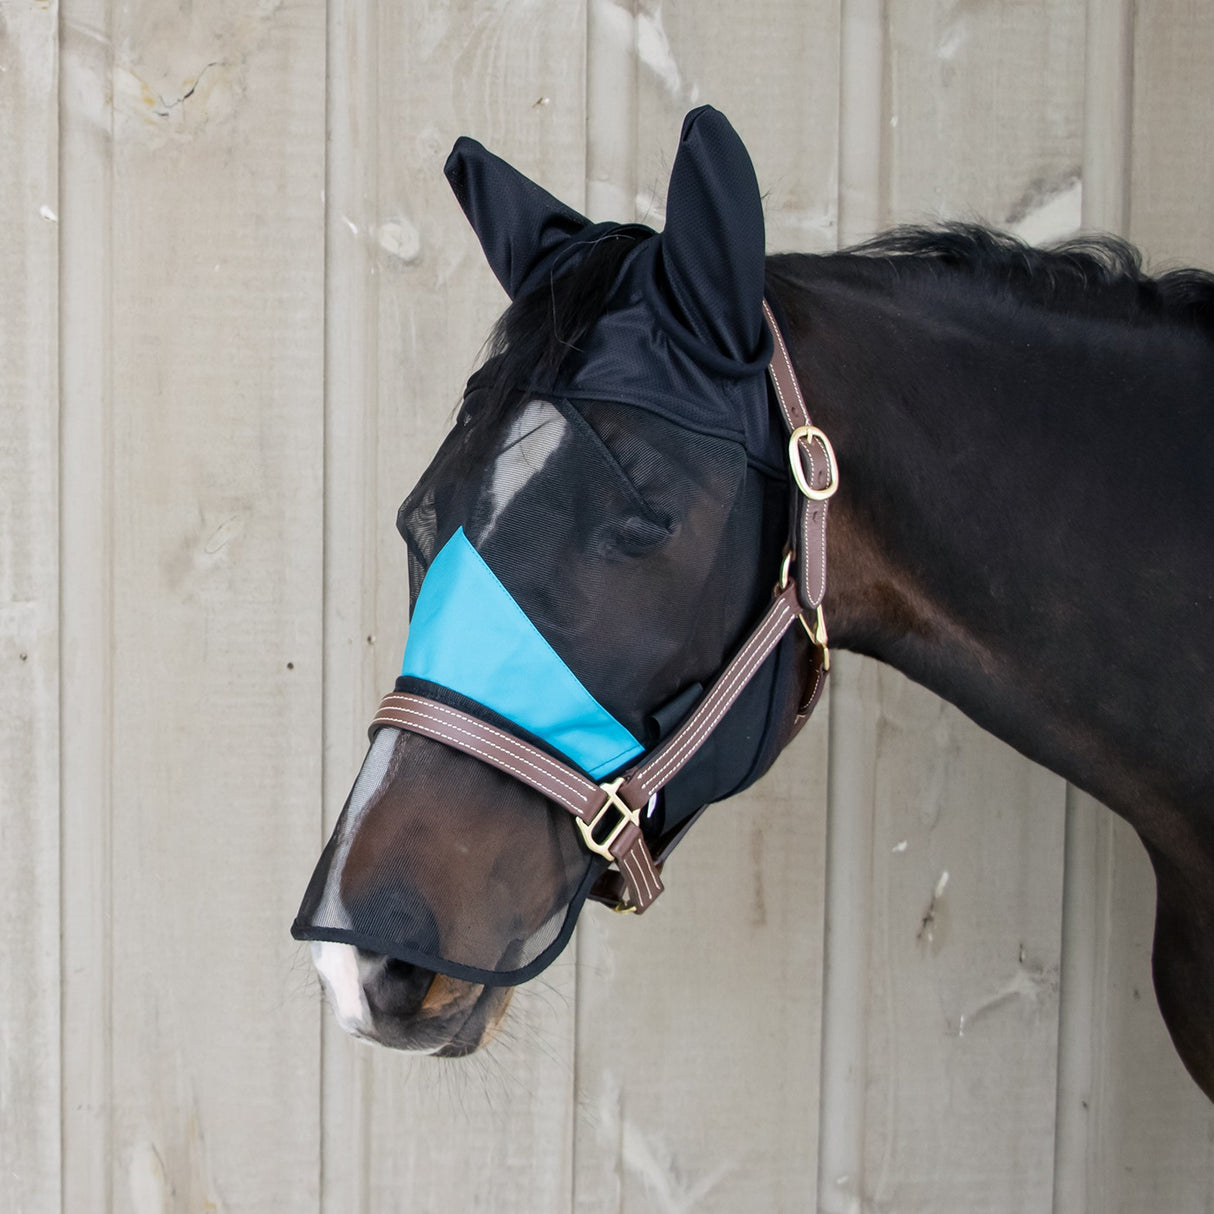 Shedrow Fly Mask W/ Ears & Nose Cover